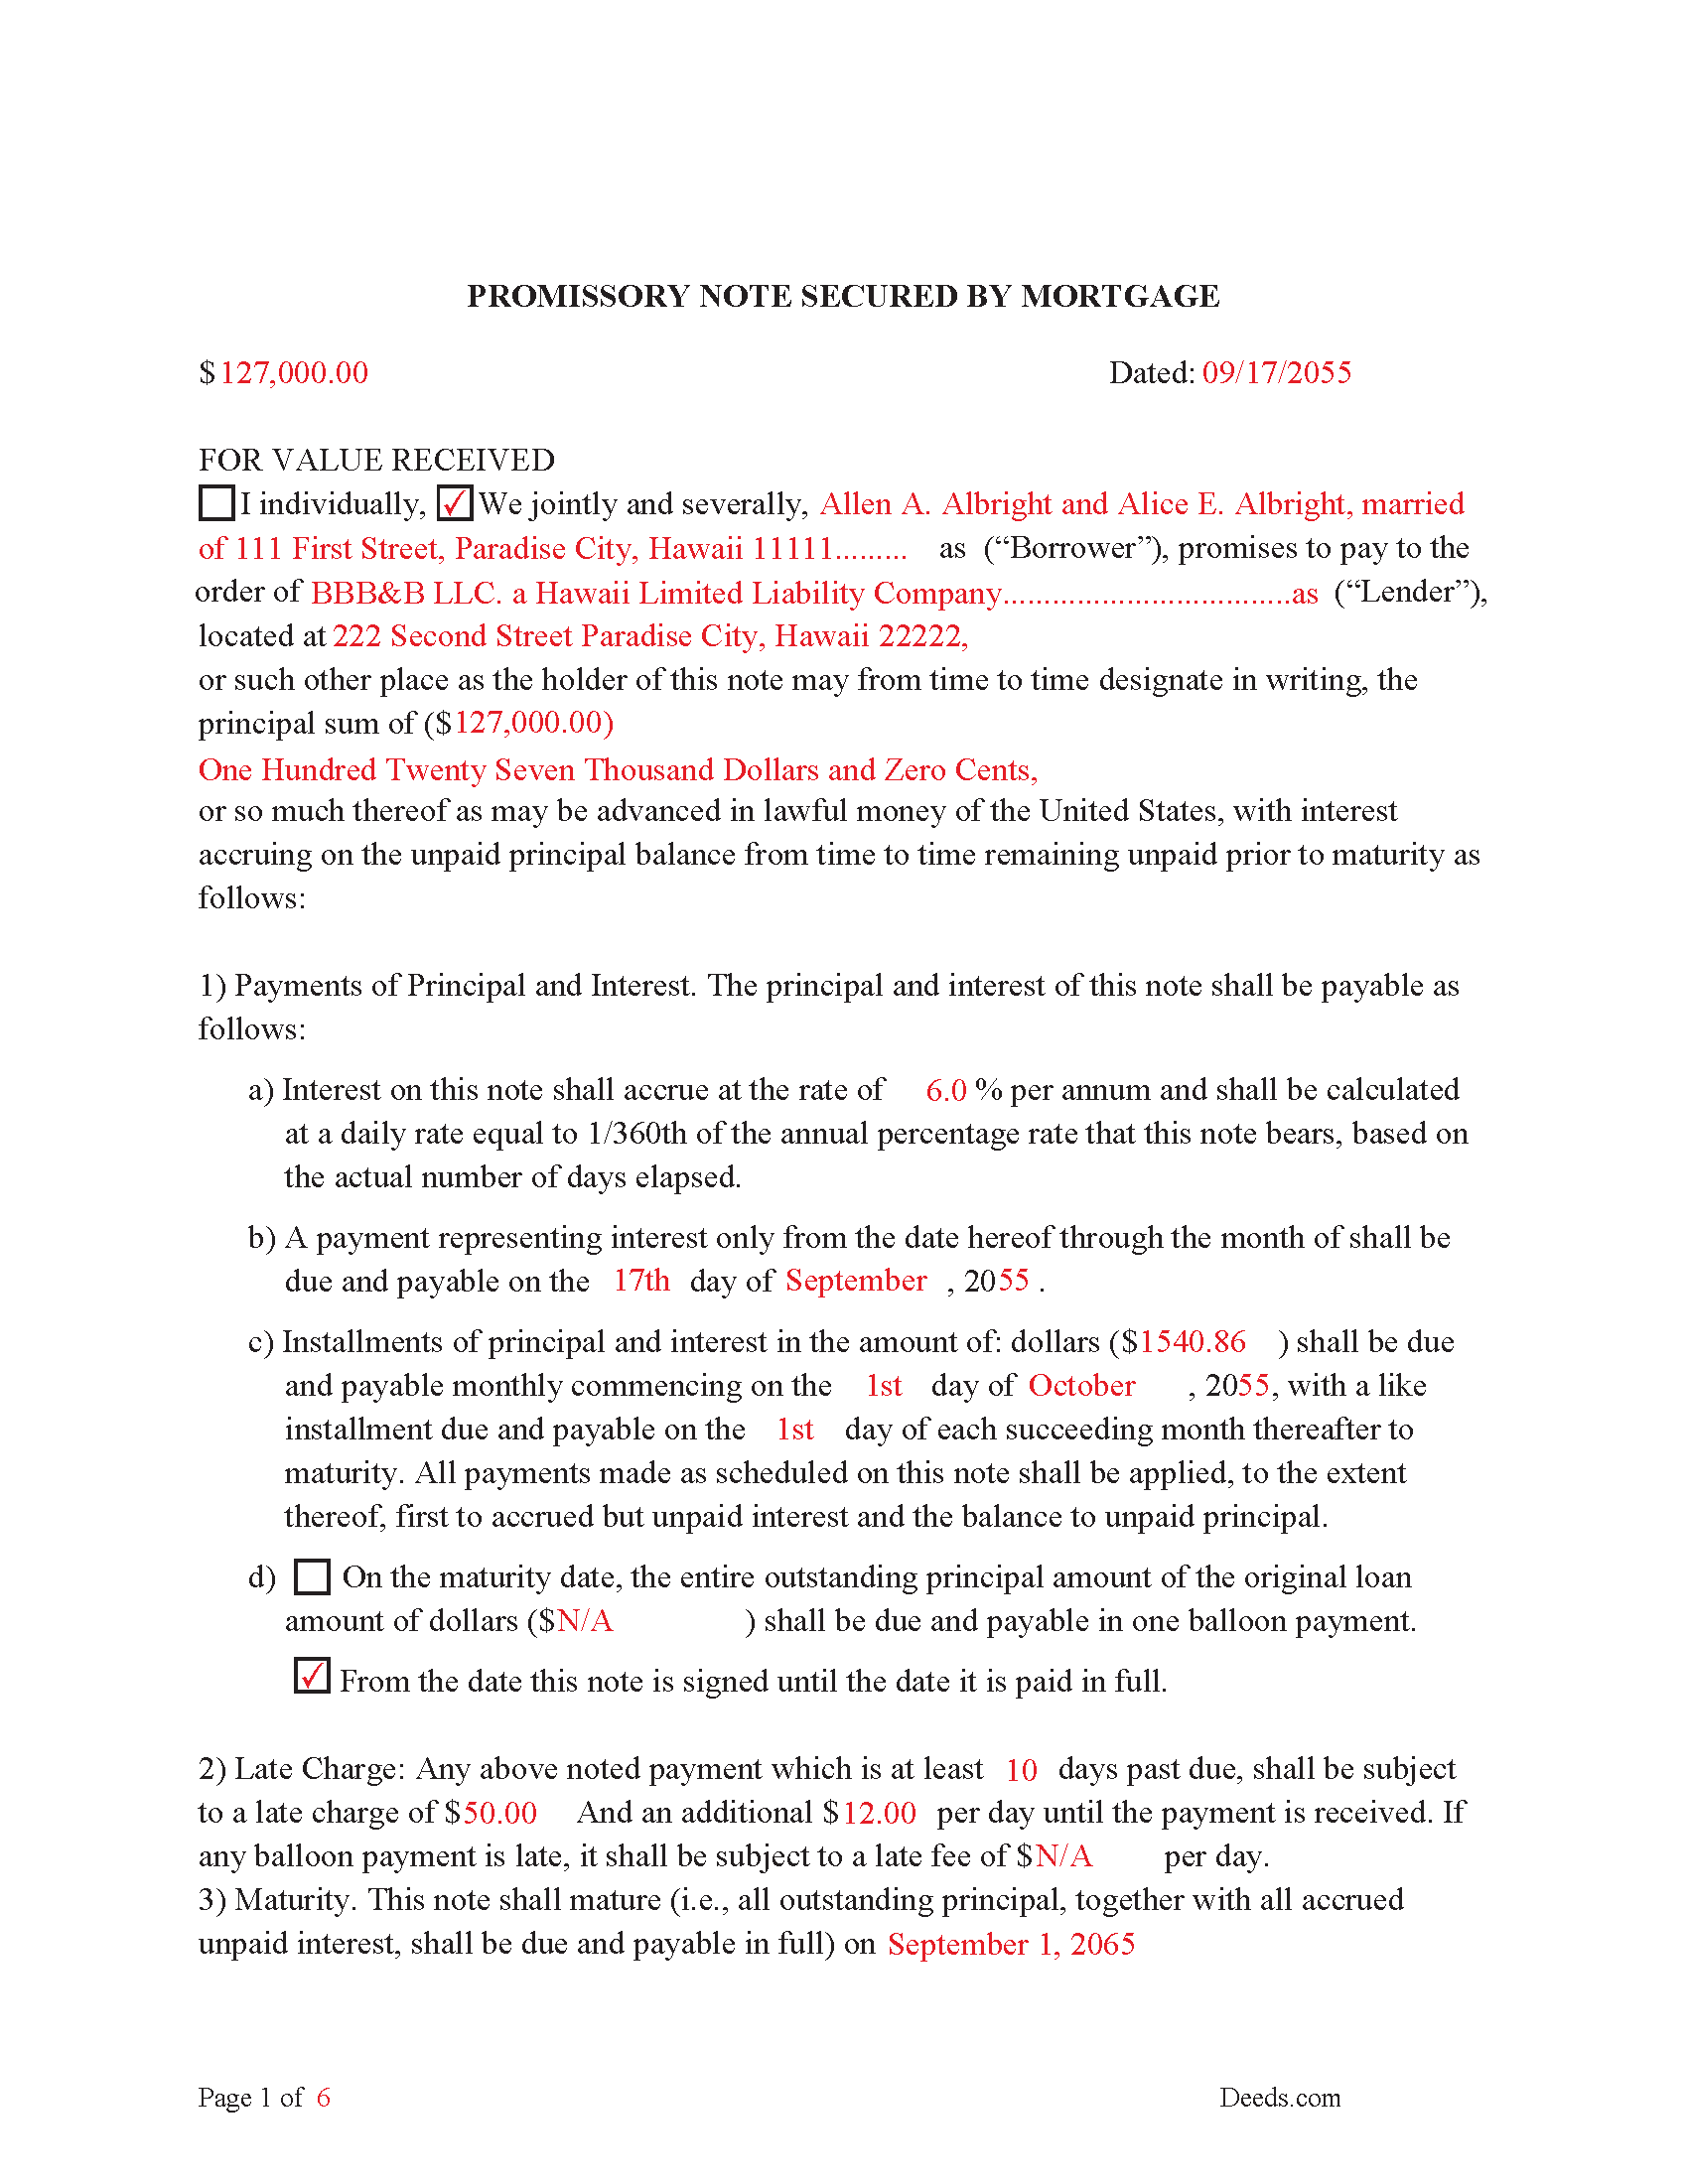 Completed Example of a Promissory Note Document